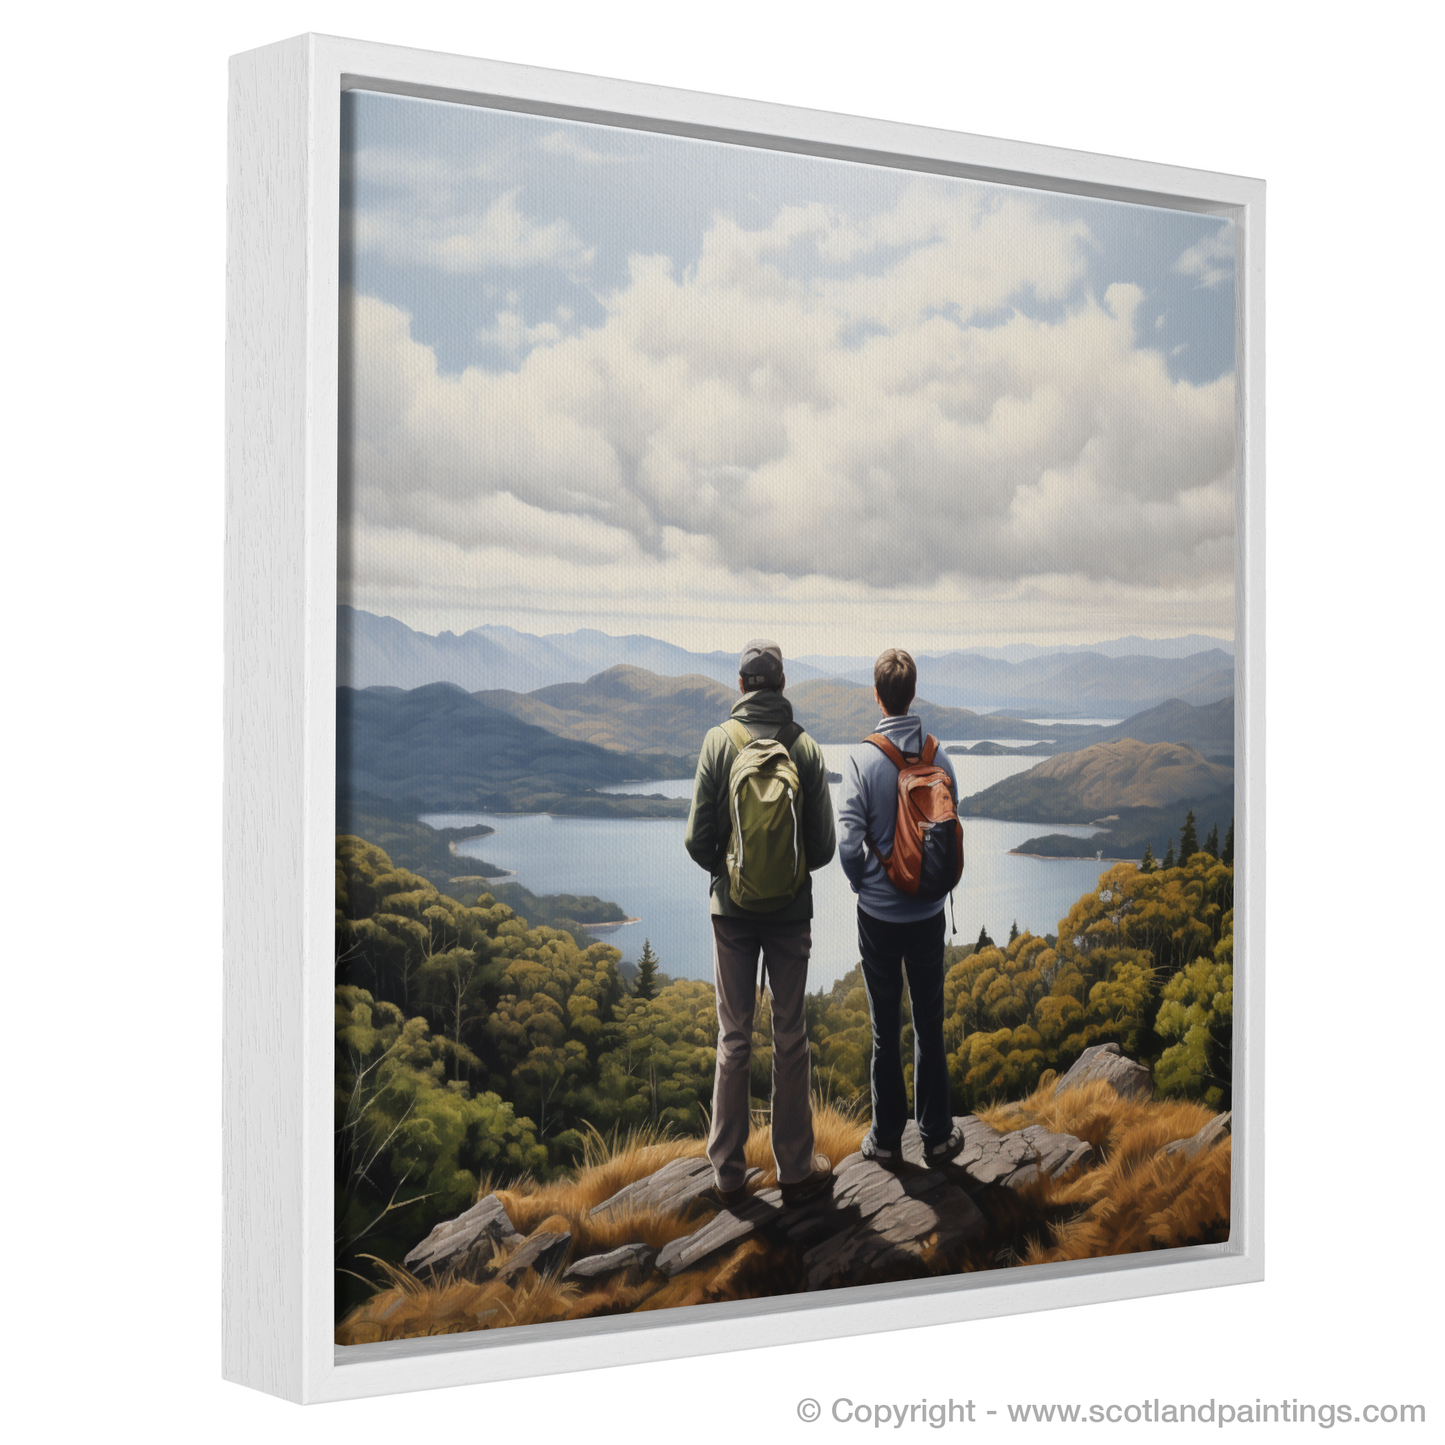 Painting and Art Print of Two hikers looking out on Loch Lomond entitled "Highland Contemplation: Two Hikers and the Serenity of Loch Lomond".